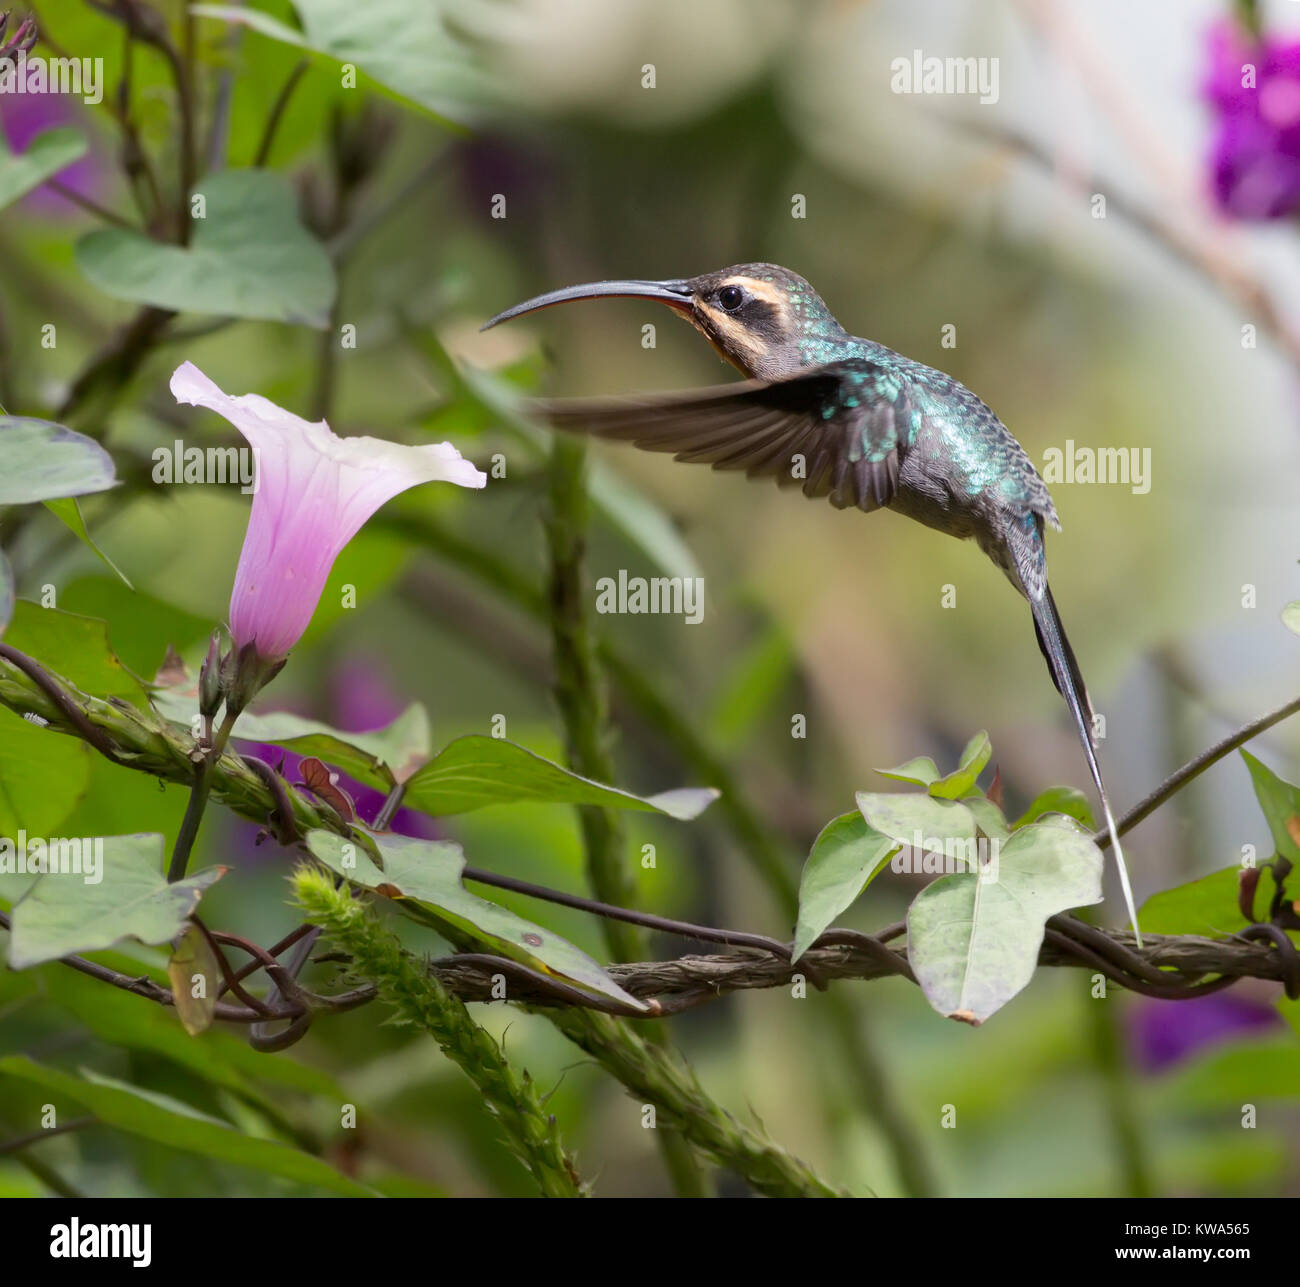 Feamle Green Hermit Hummingbird eating nectar from a flower Stock Photo